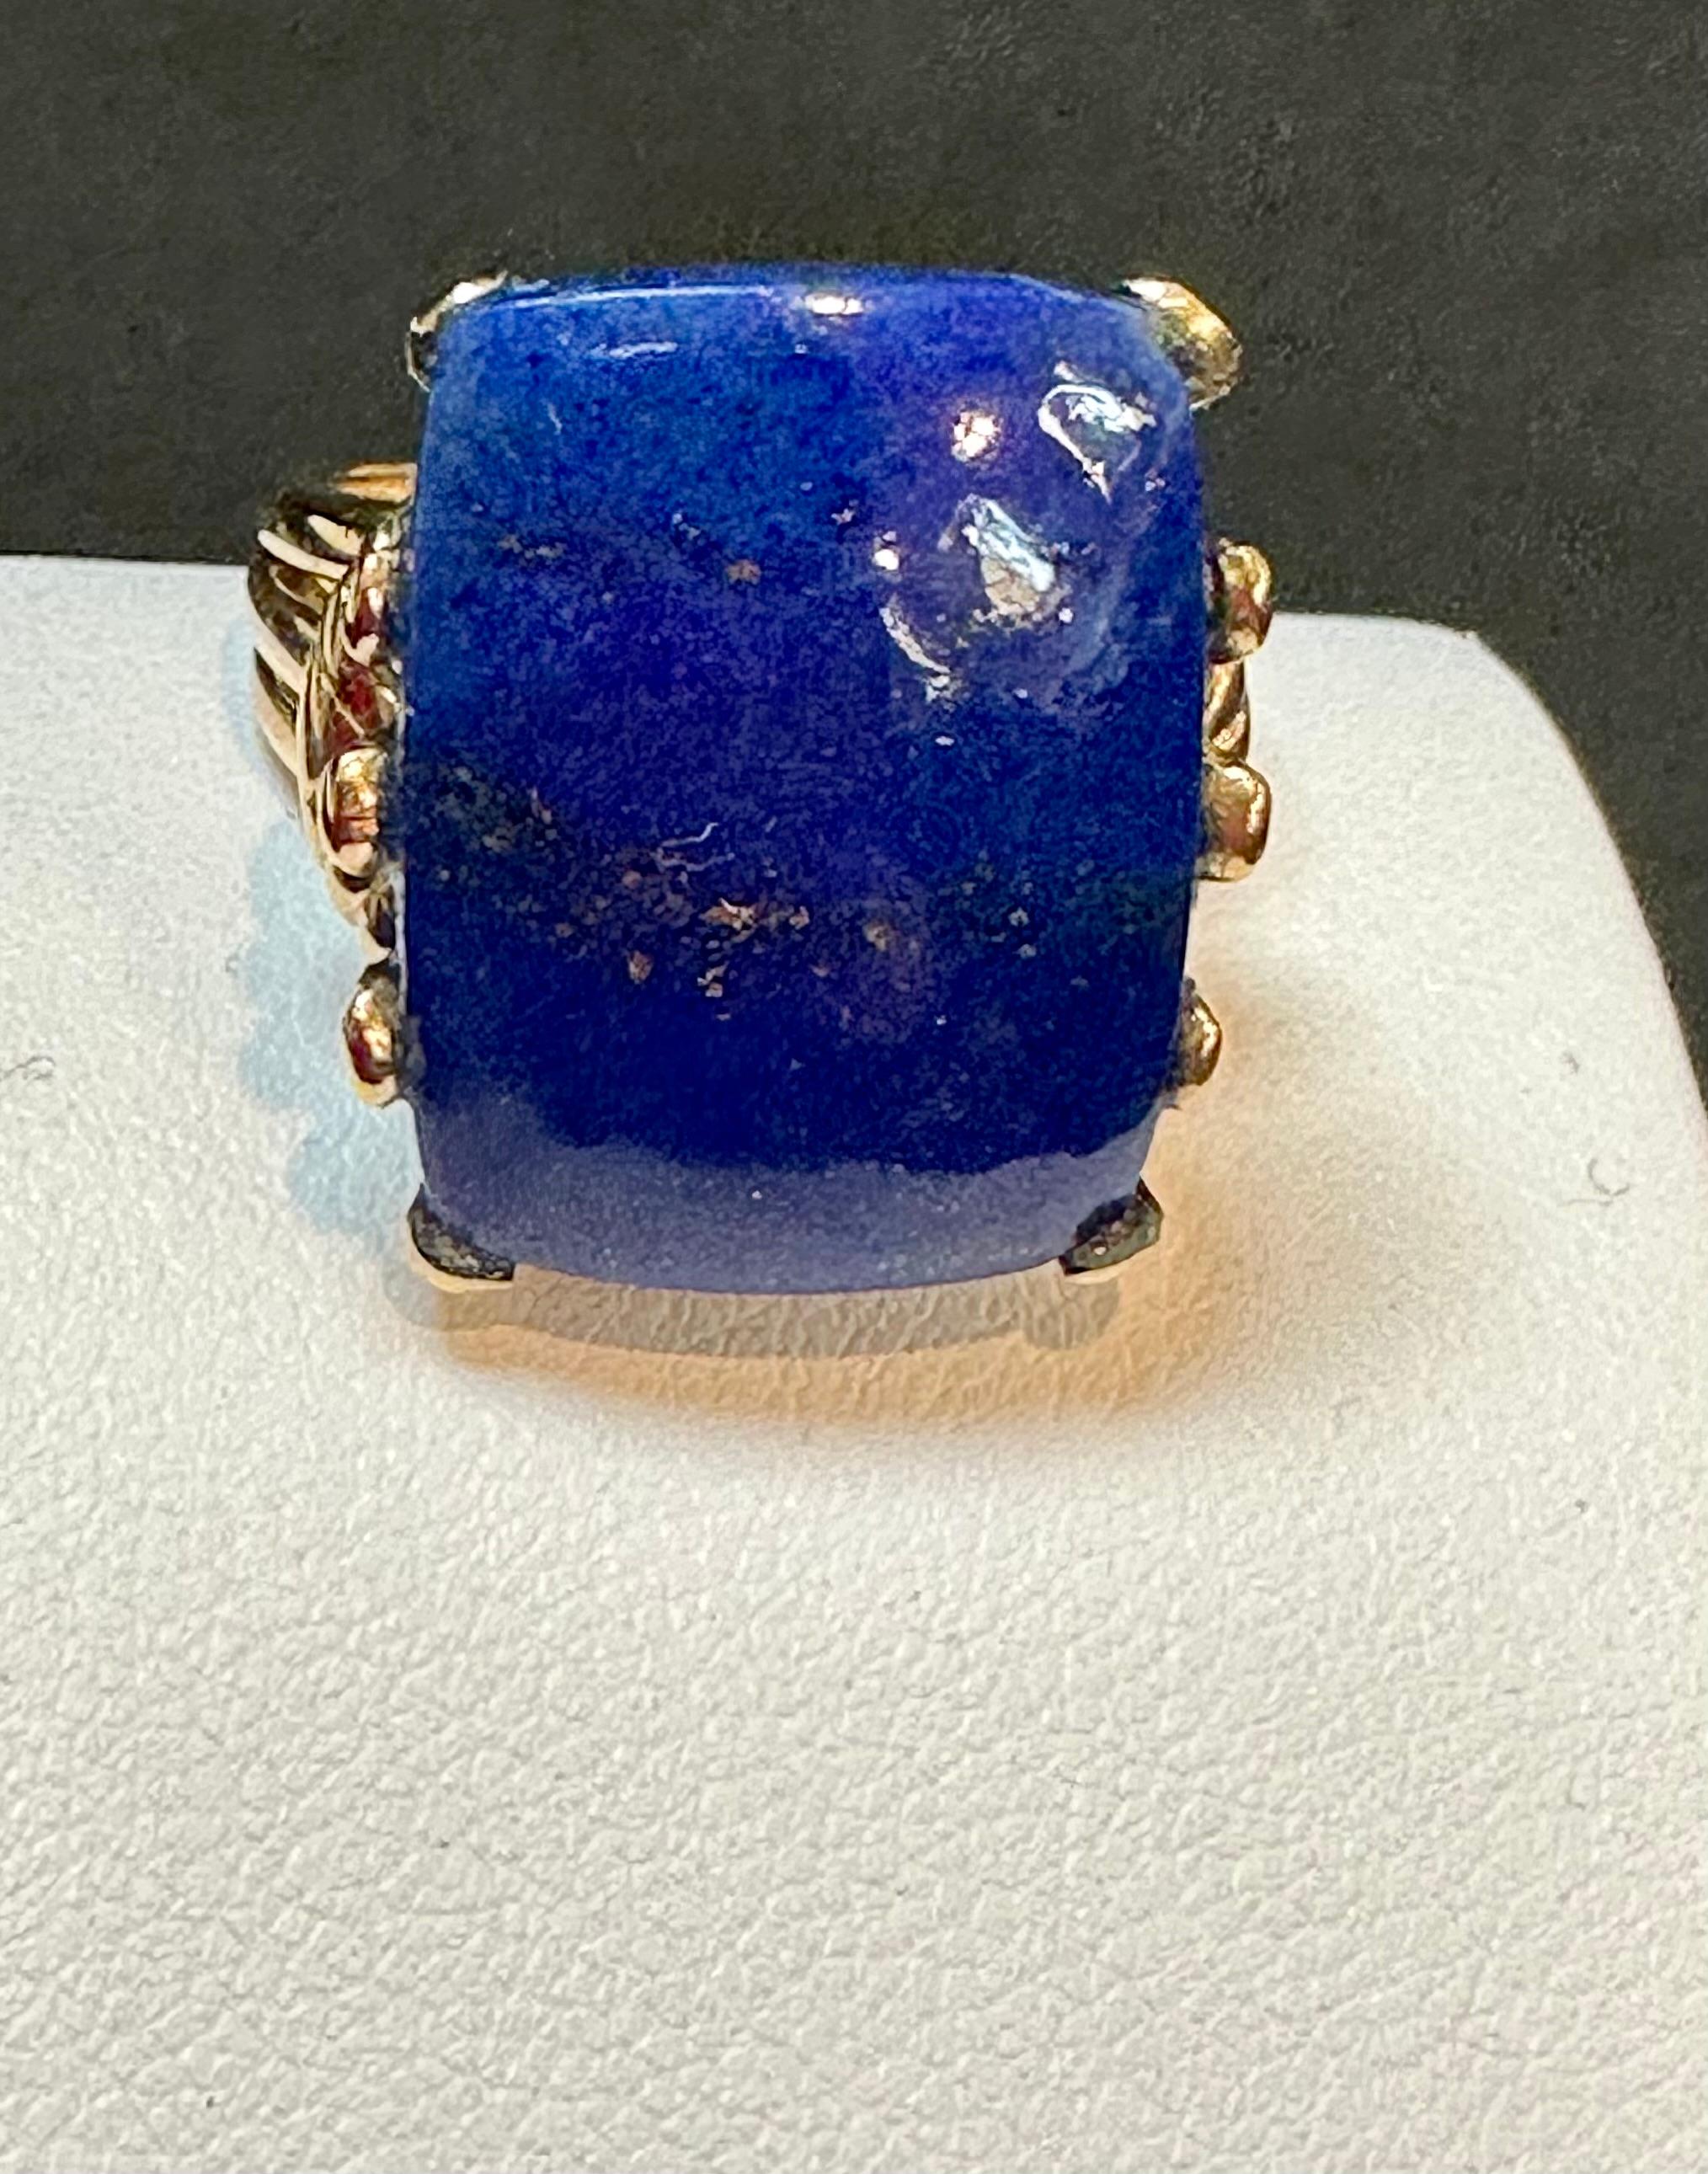 15 Ct Emerald cut Natural Lapis Lazuli Ring in 14 Kt Yellow Gold, Estate Size 7 For Sale 2